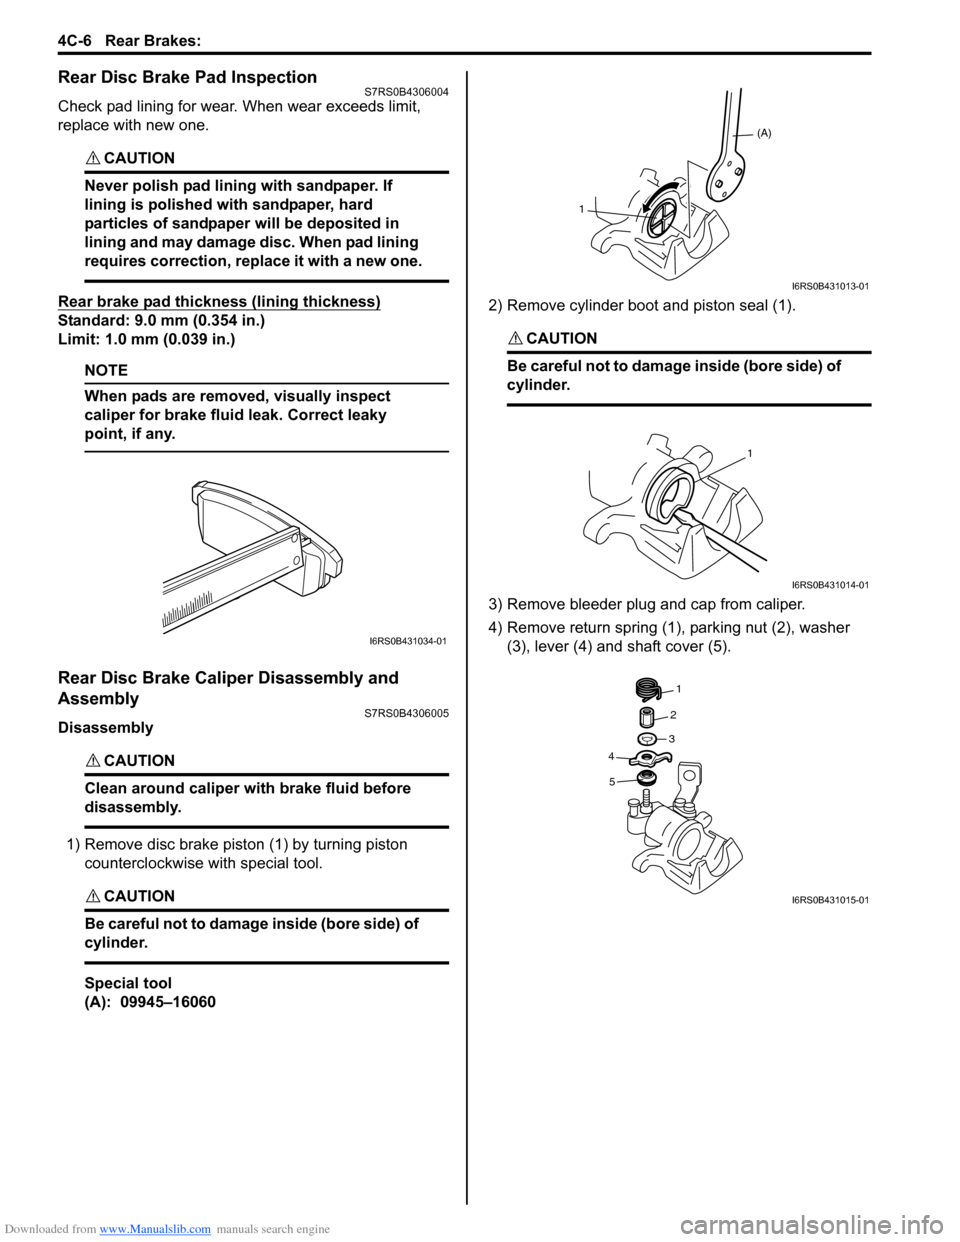 SUZUKI SWIFT 2007 2.G Service Workshop Manual Downloaded from www.Manualslib.com manuals search engine 4C-6 Rear Brakes: 
Rear Disc Brake Pad InspectionS7RS0B4306004
Check pad lining for wear. When wear exceeds limit, 
replace with new one.
CAUTI